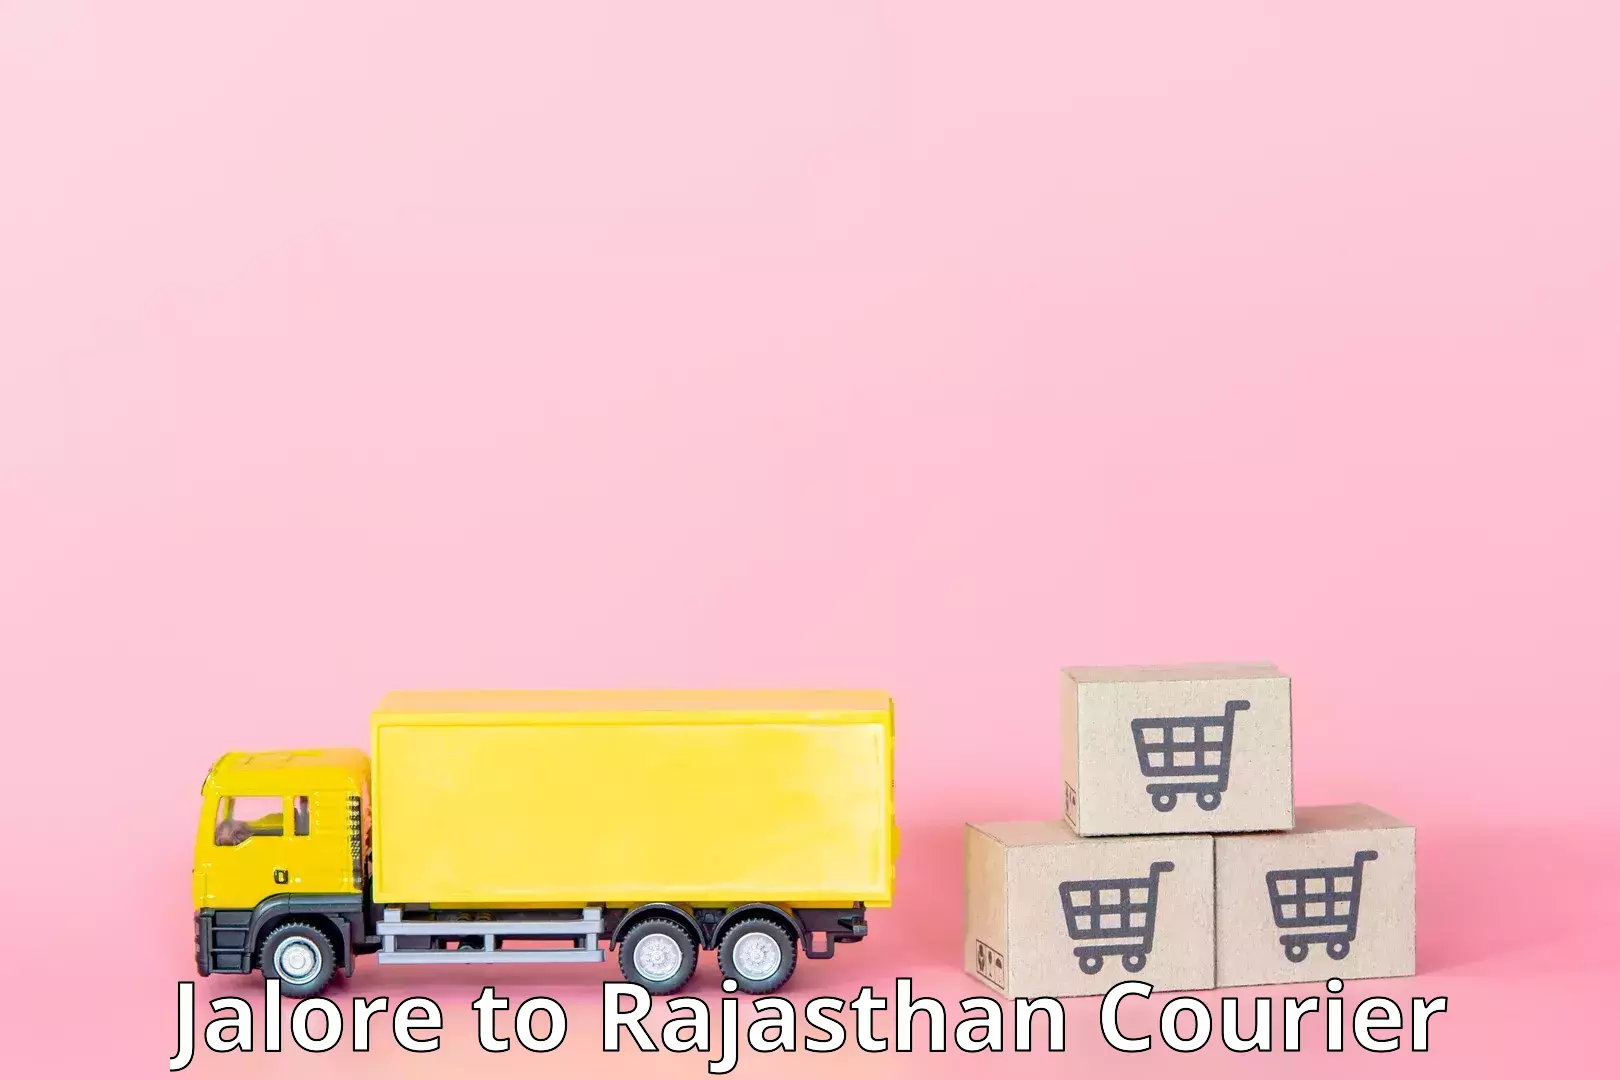 User-friendly courier app Jalore to Rajasthan